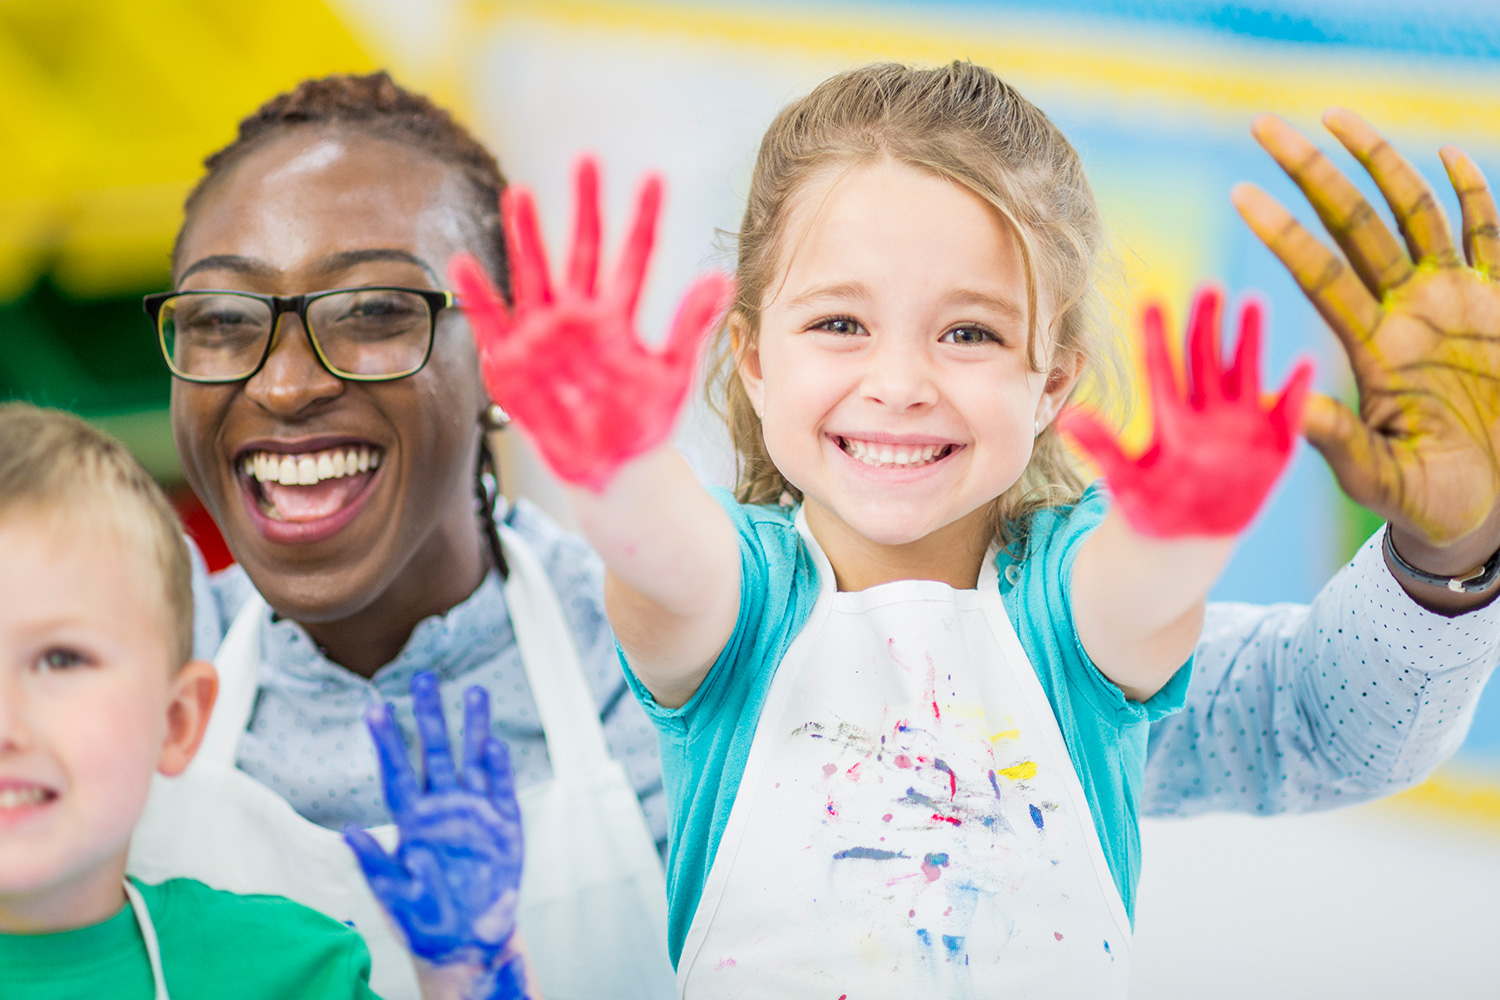 Children and adult showing painty hands smile at camera